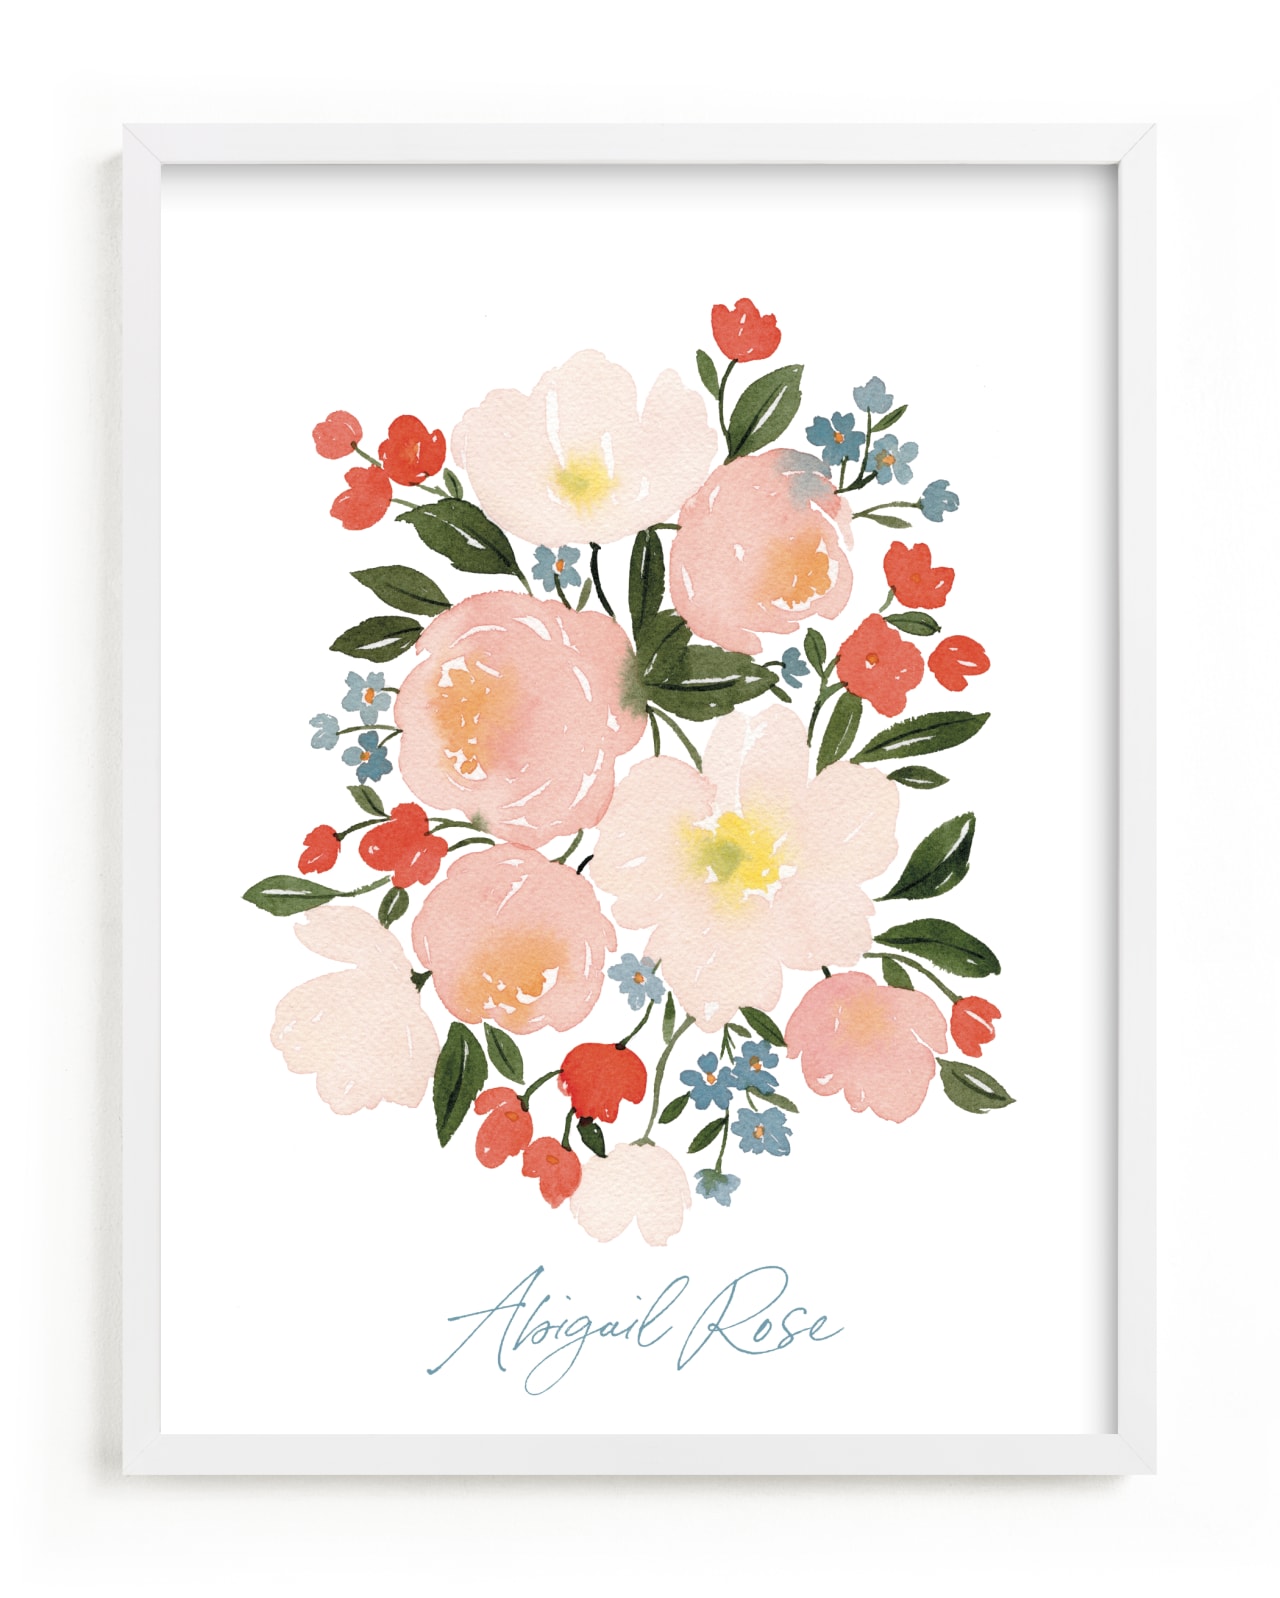 This is a white nursery wall art by Kelsey Carlson called Poppies & Roses.